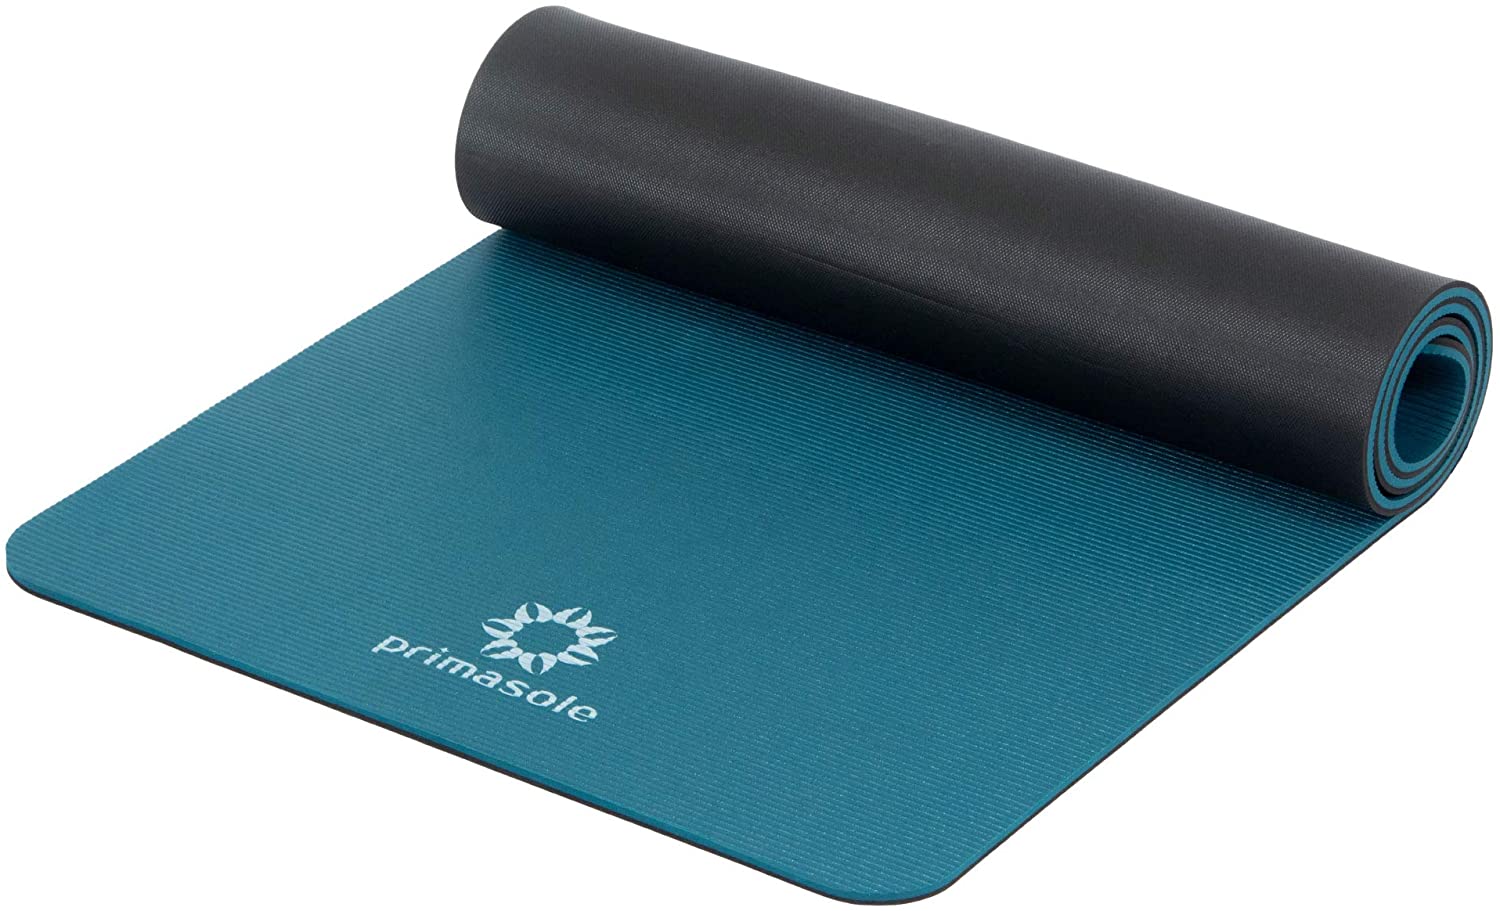 PRIMASOLE Yoga Mat Eco-Friendly Material 1/2" Non-Slip Yoga Pilates Fitness at Home & Gym Twin Color